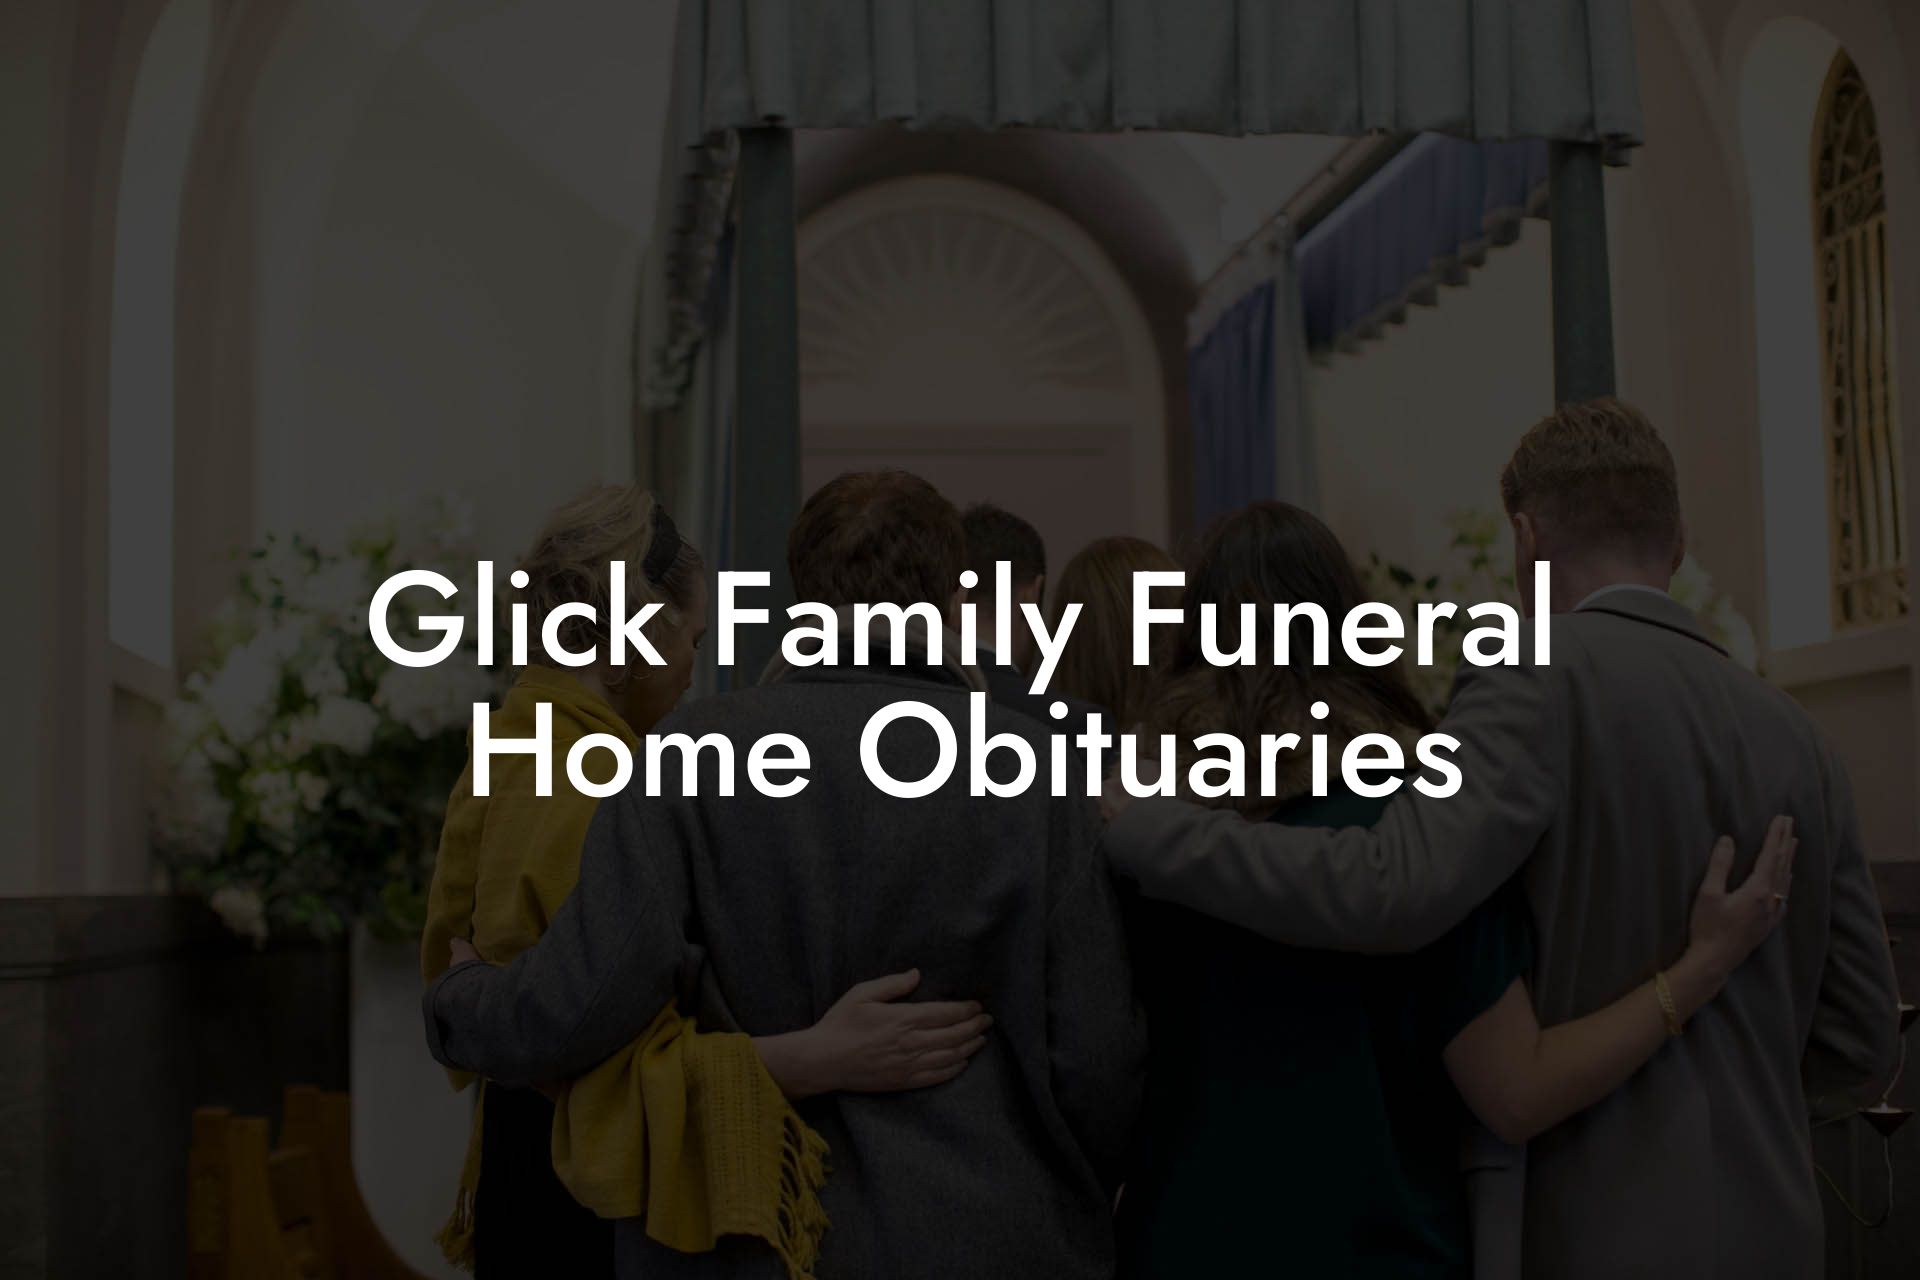 Glick Family Funeral Home Obituaries